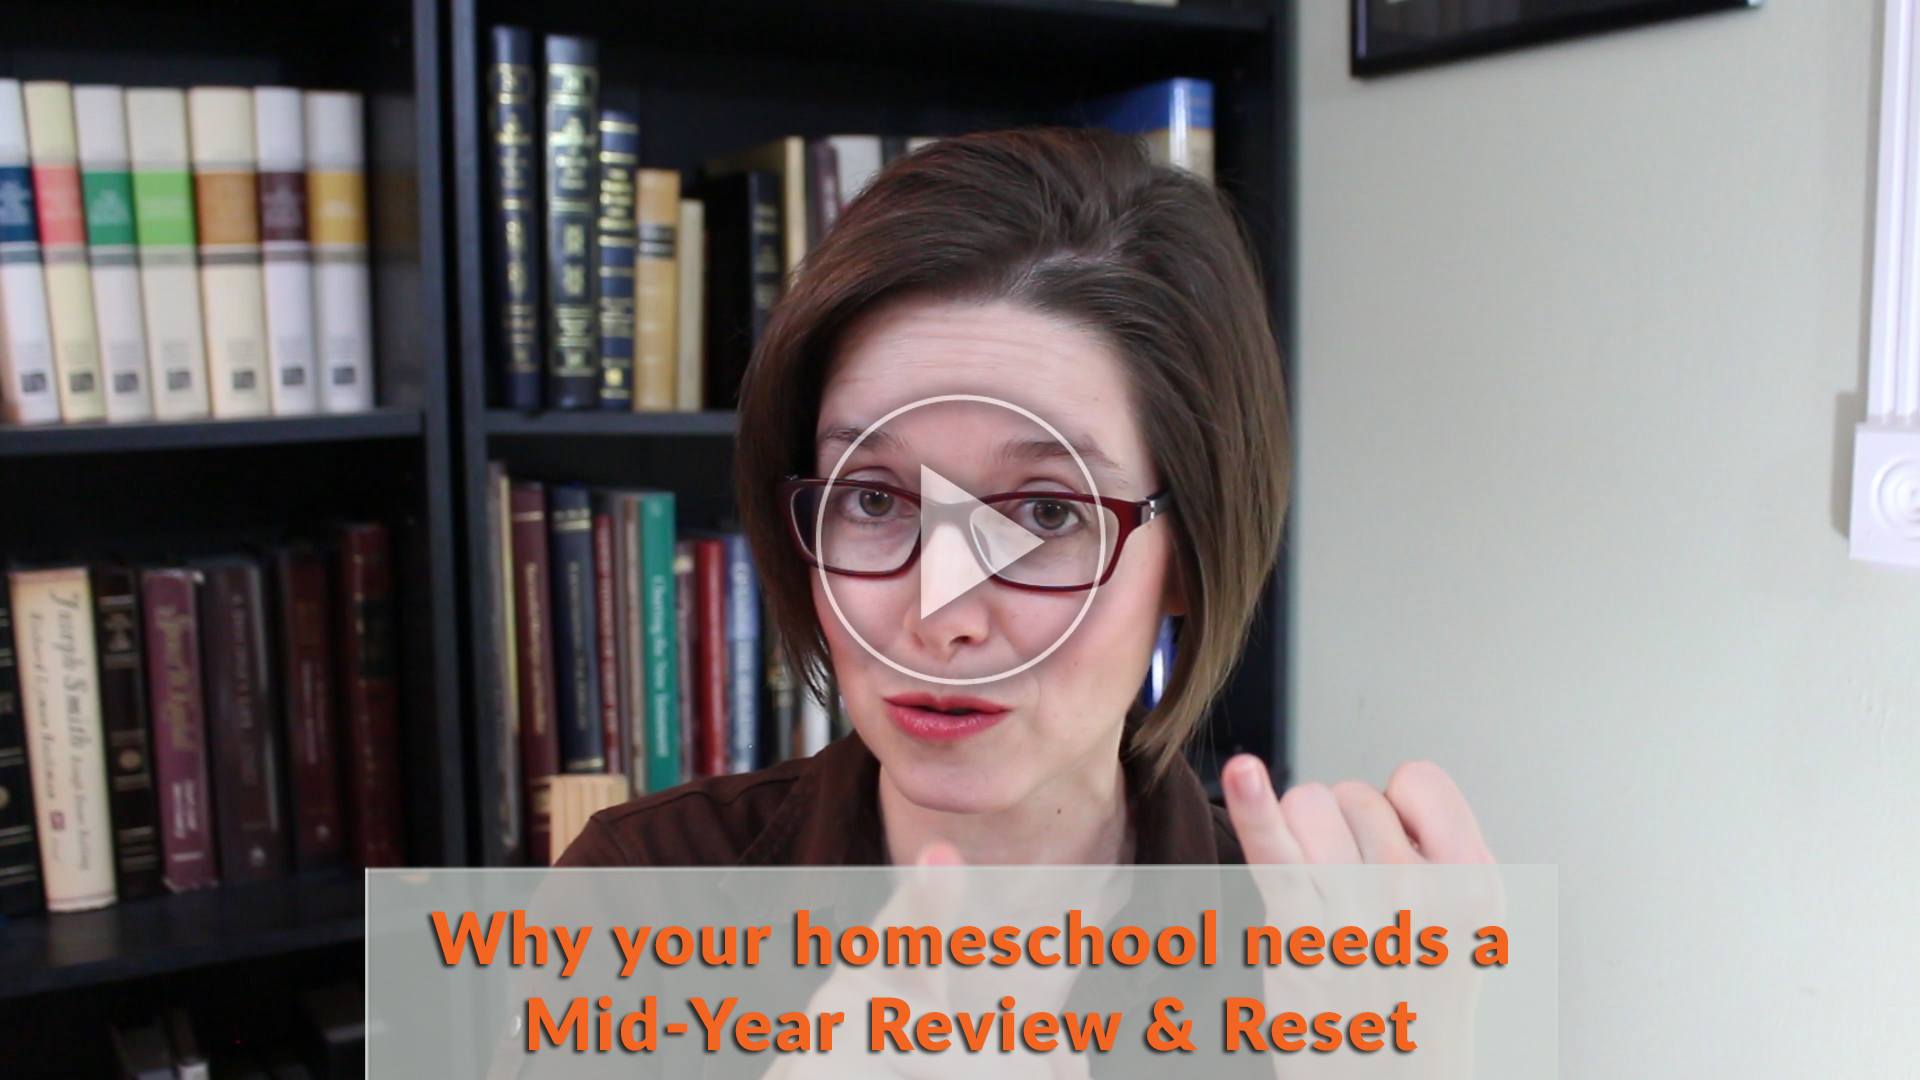 It’s January -- which means it’s time for the homeschool Mid-Year Reboot. During your mid-year review, you may consider radically changing your curriculum or your schedule. Or you may just need to make a few updates to get things working even better.   | Changing homeschool curriculum | Changing homeschool curriculum mid year | Homeschool mid year review | Homeschool burnout | Homeschool mid year reboot | Homeschool motivation |